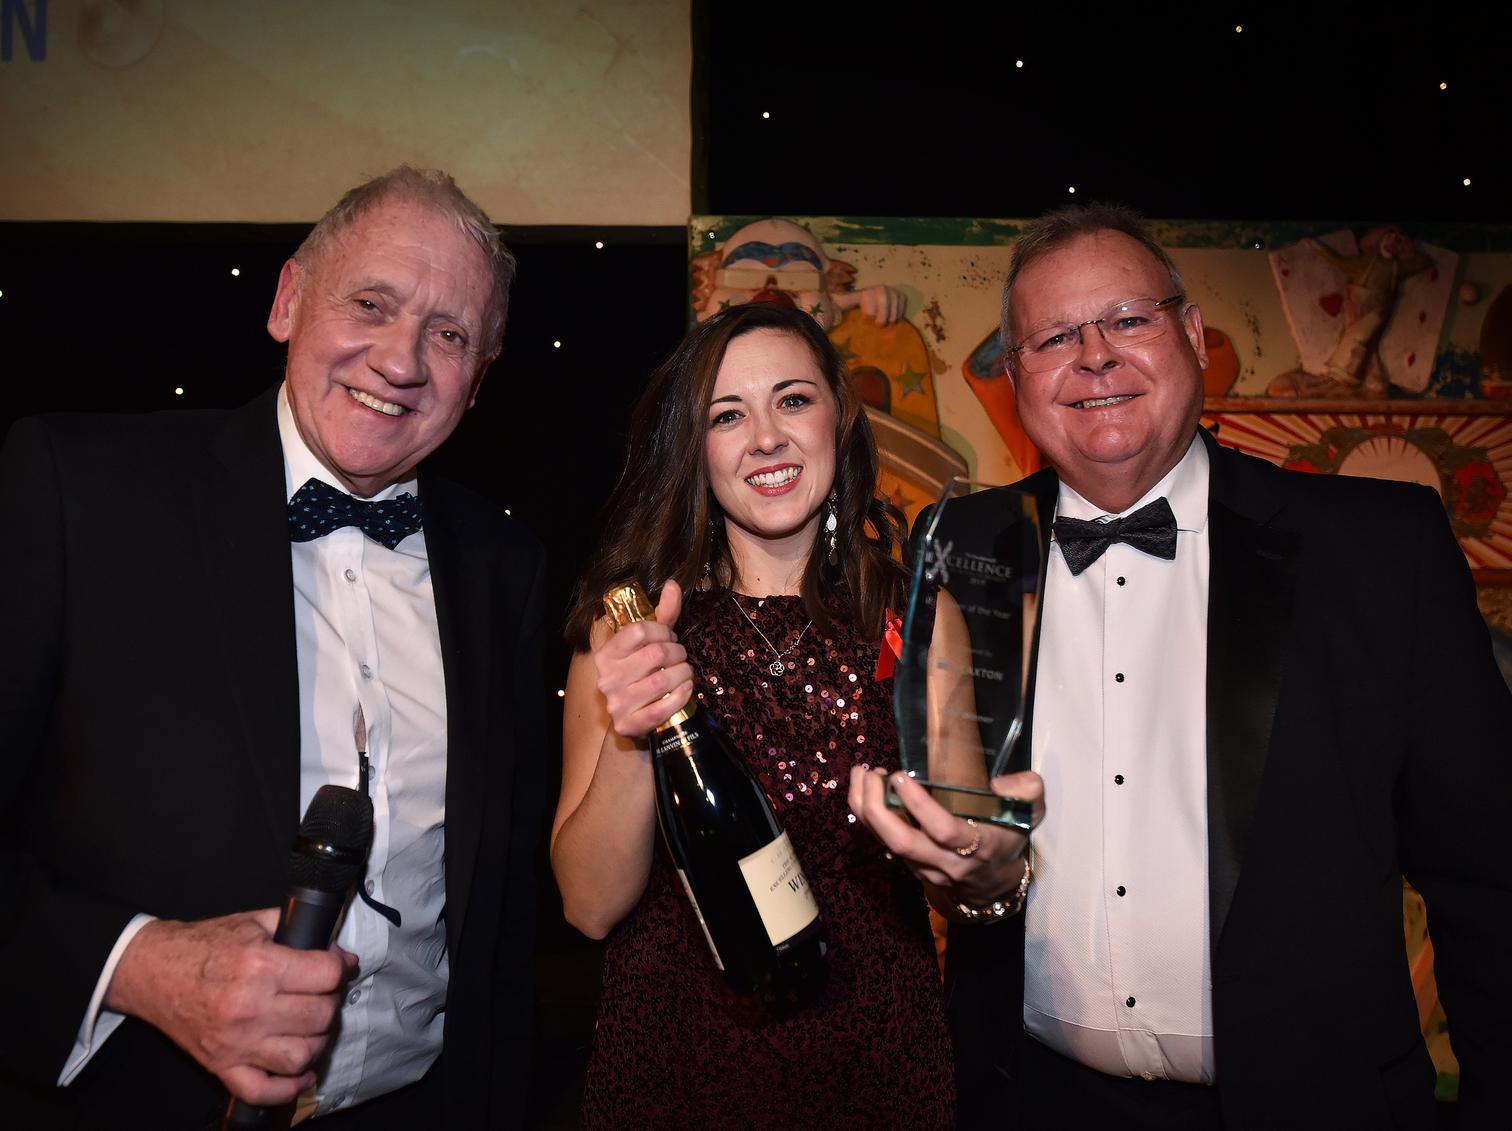 Harry Gration, Lindsay Mason from winner Cura Financial Services and Alan Atkinson from Plaxton.